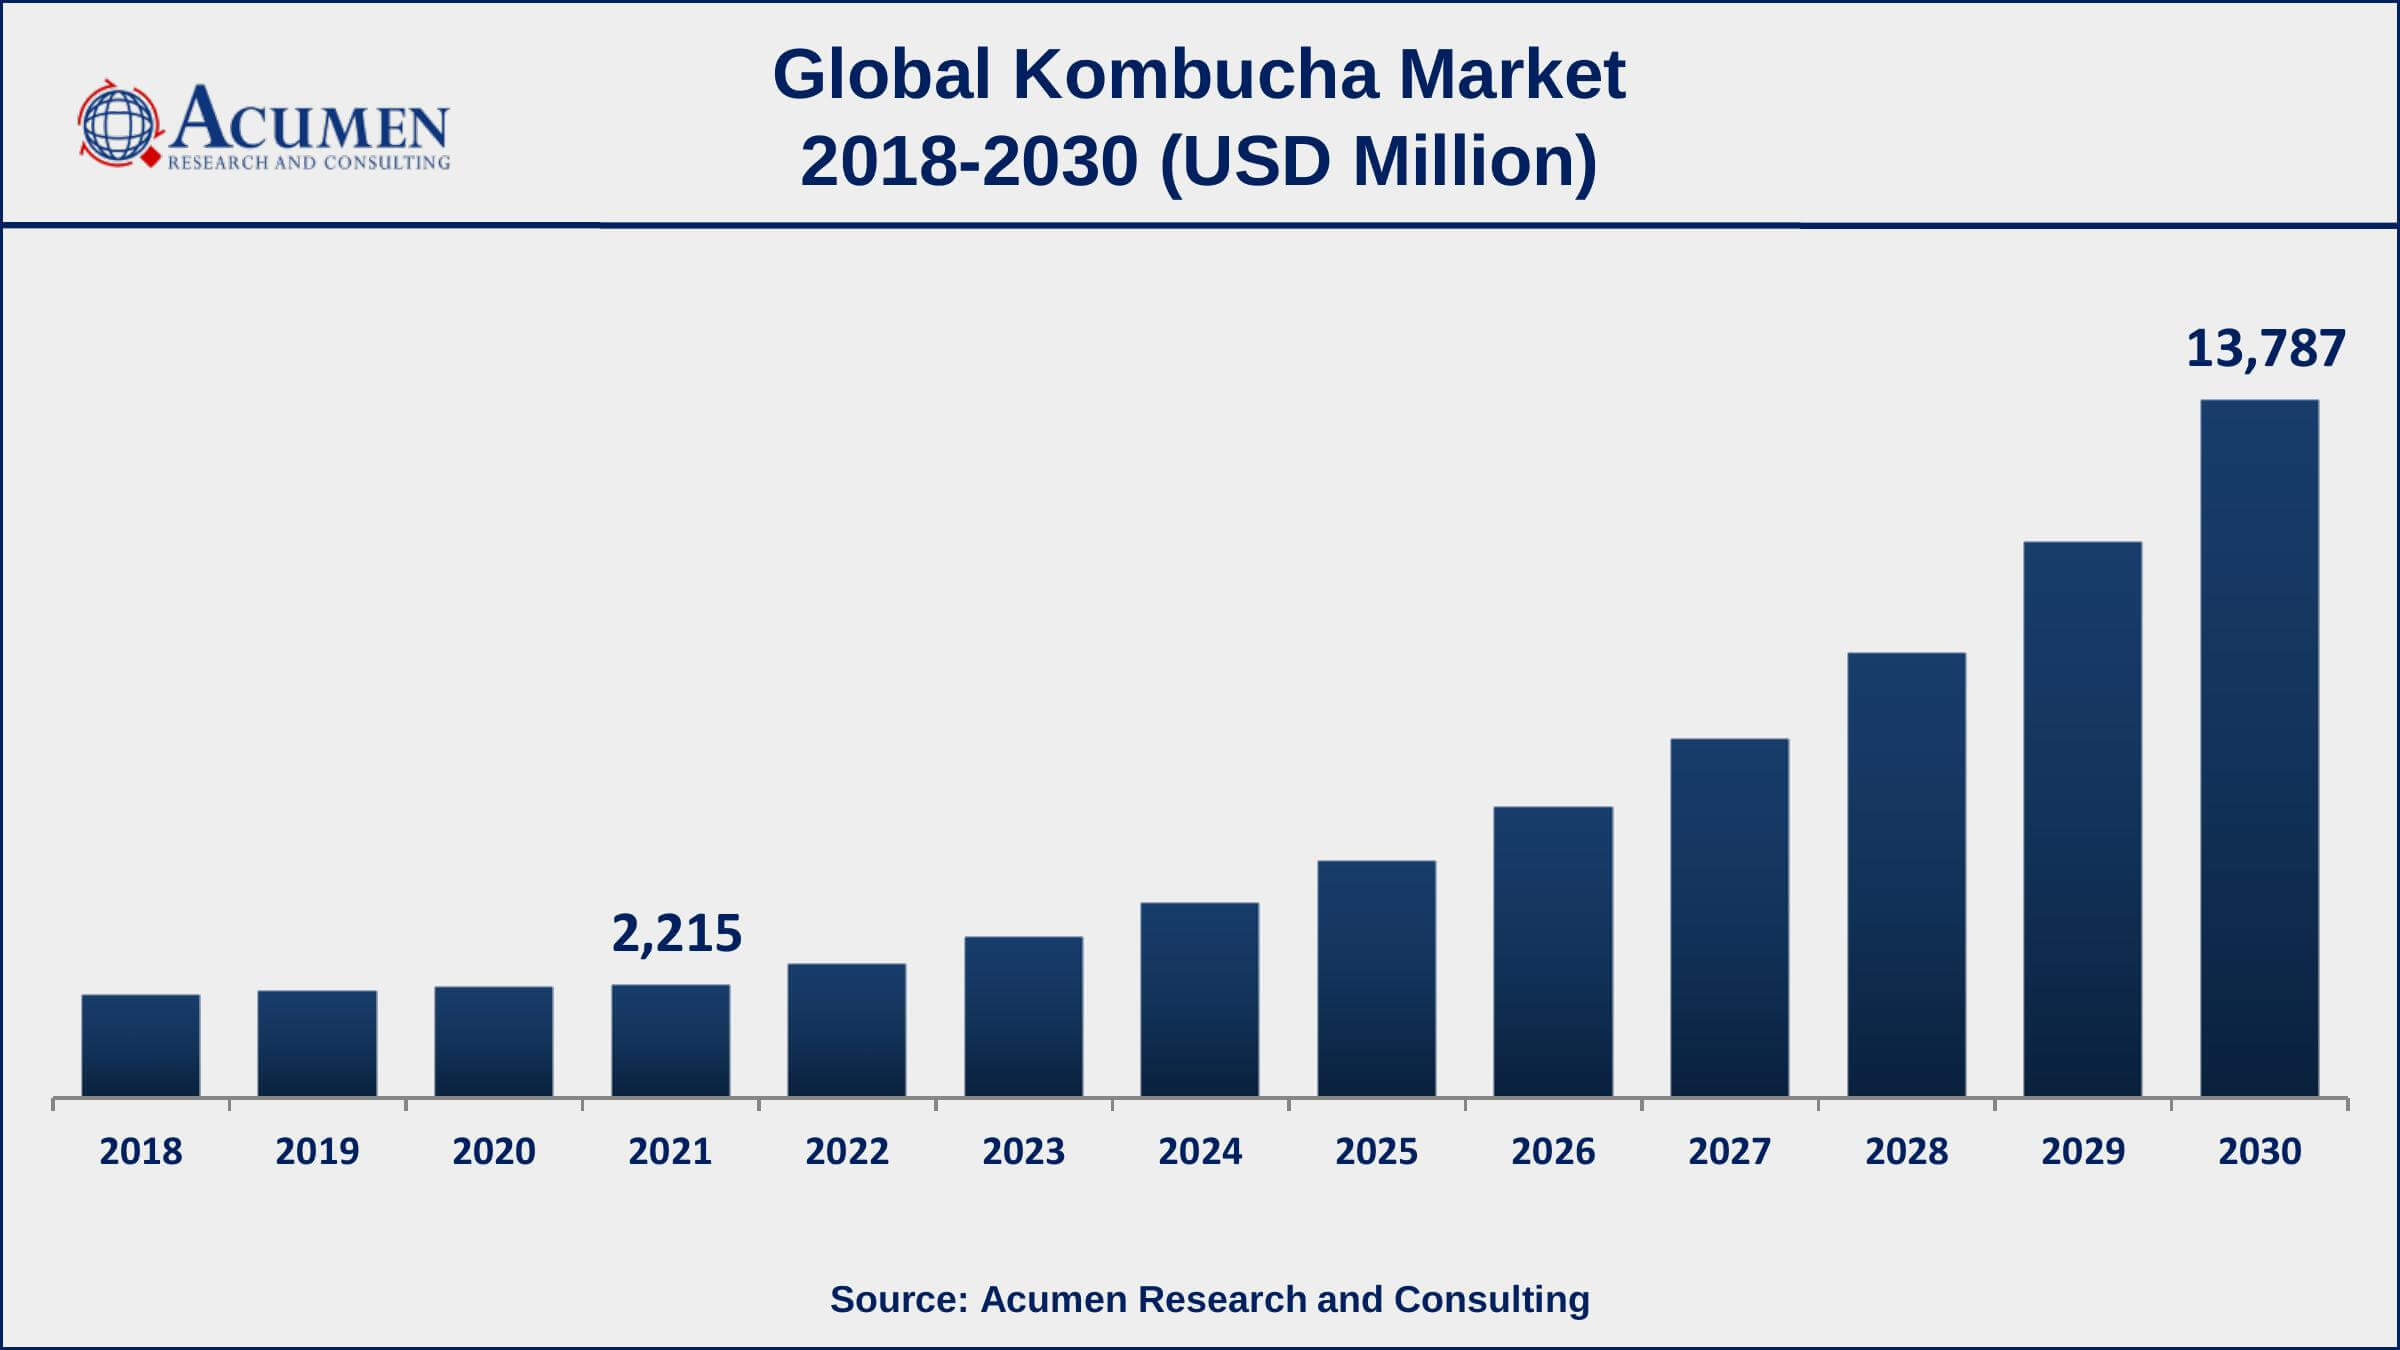 North America kombucha market share accounted for over 48% of total market shares in 2021